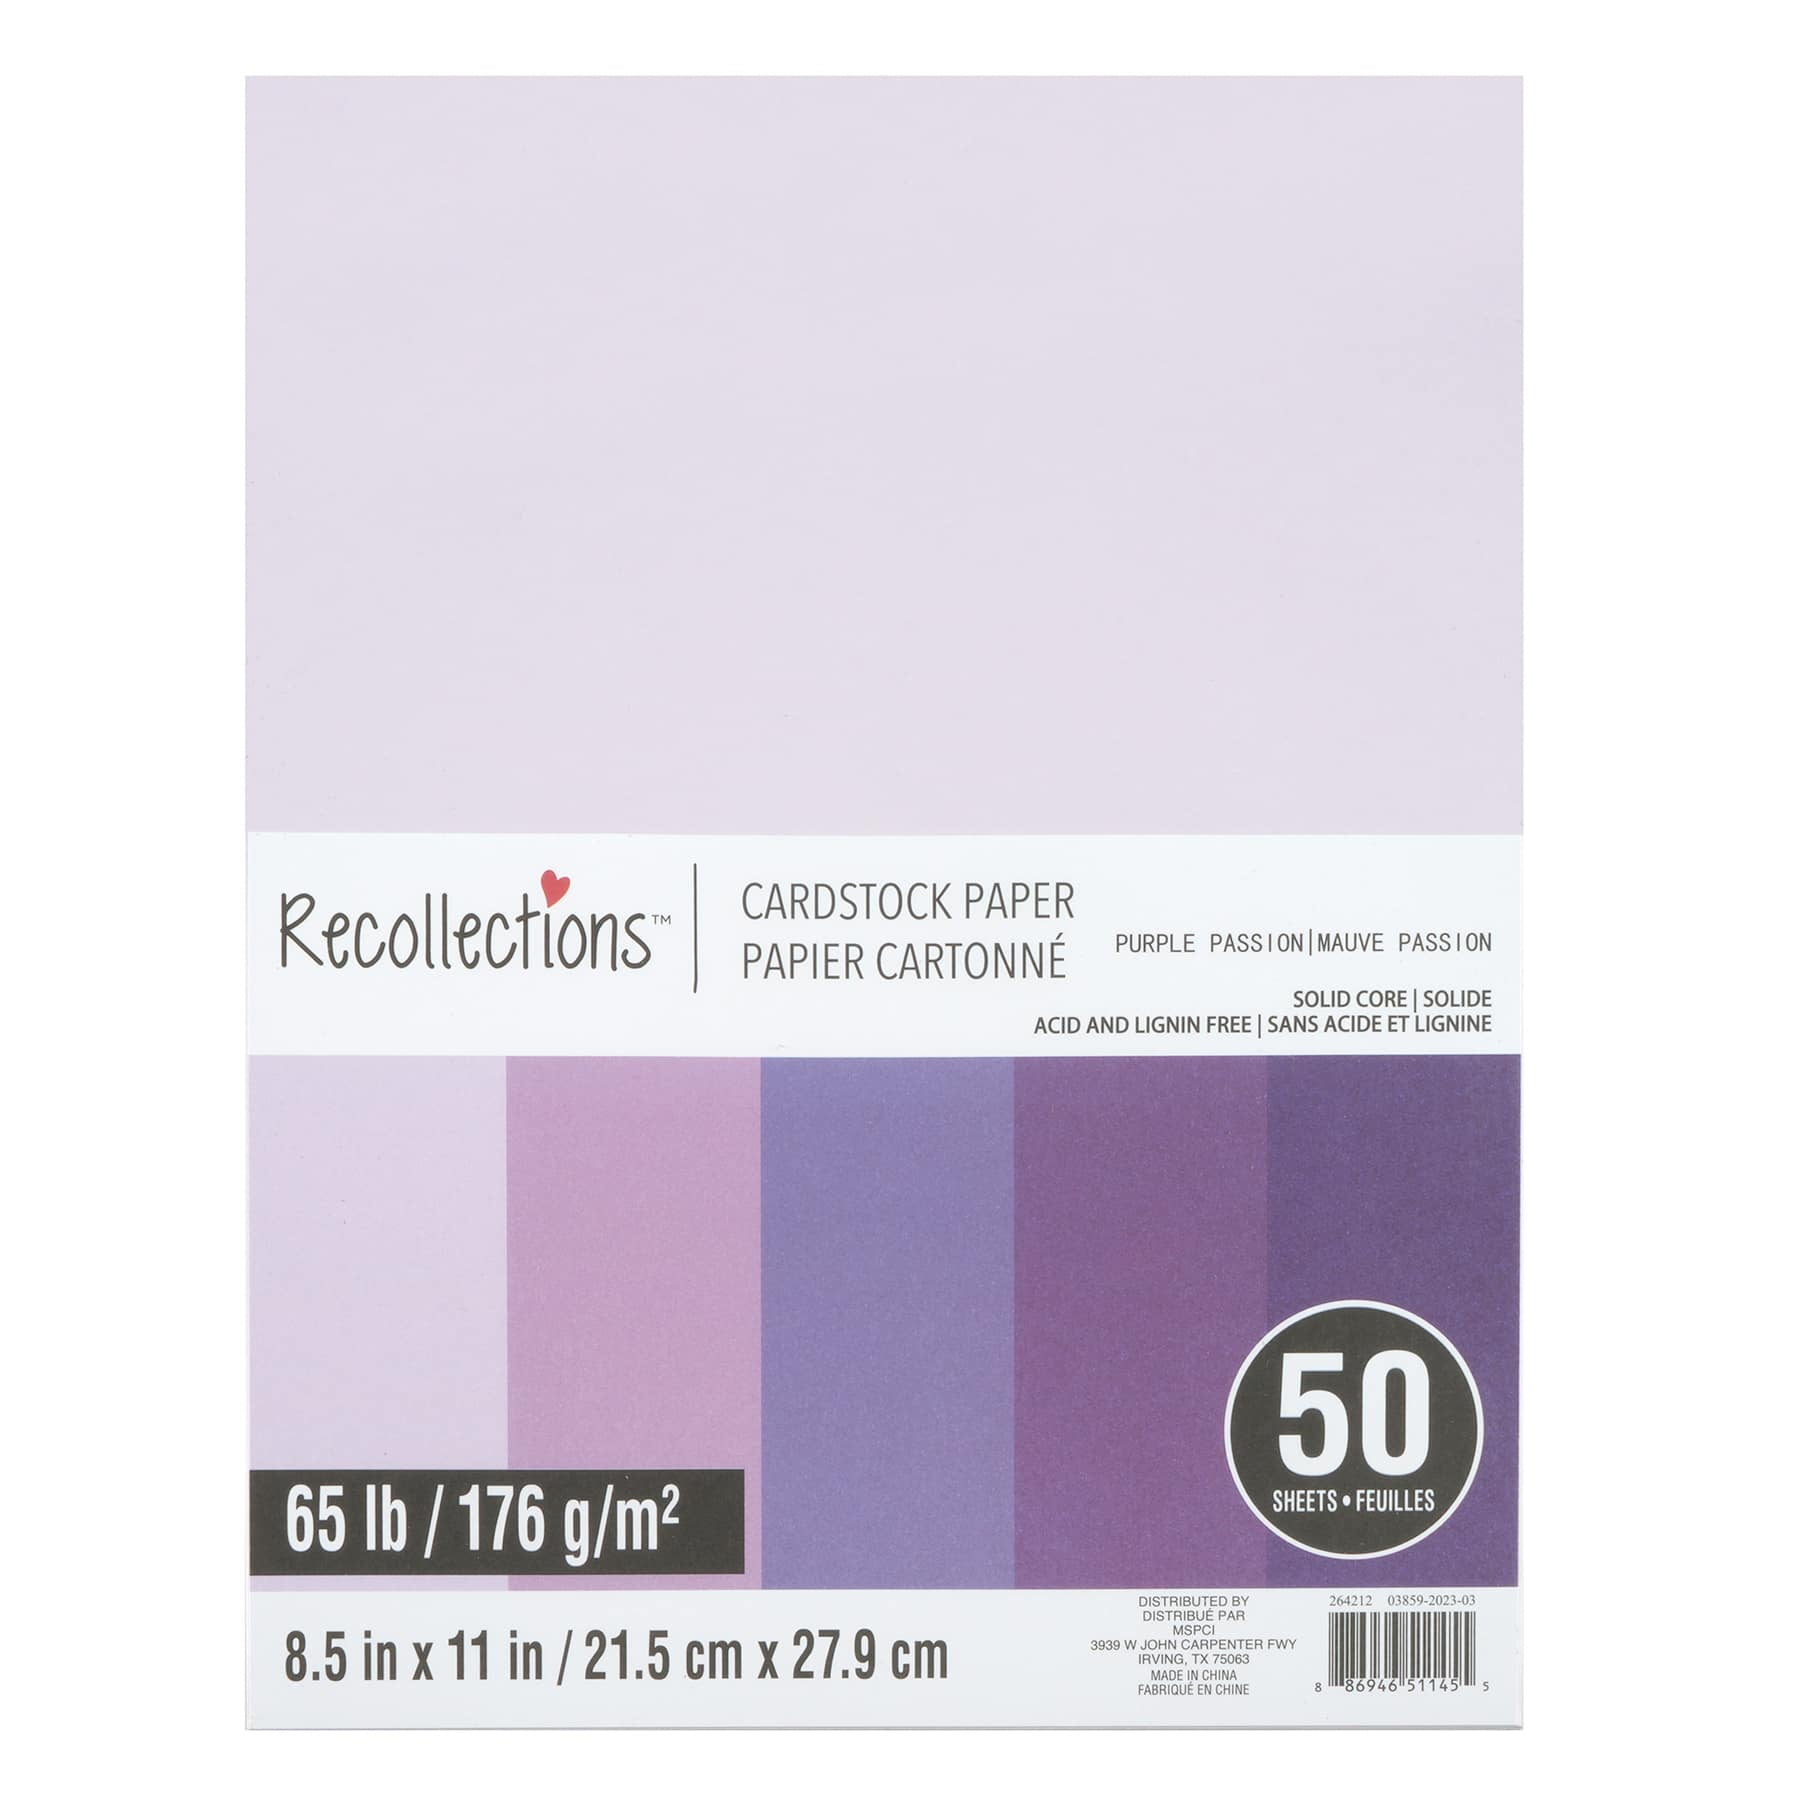 Cardstock Paper Value Pack, 8.5 x 11 in White by Recollections